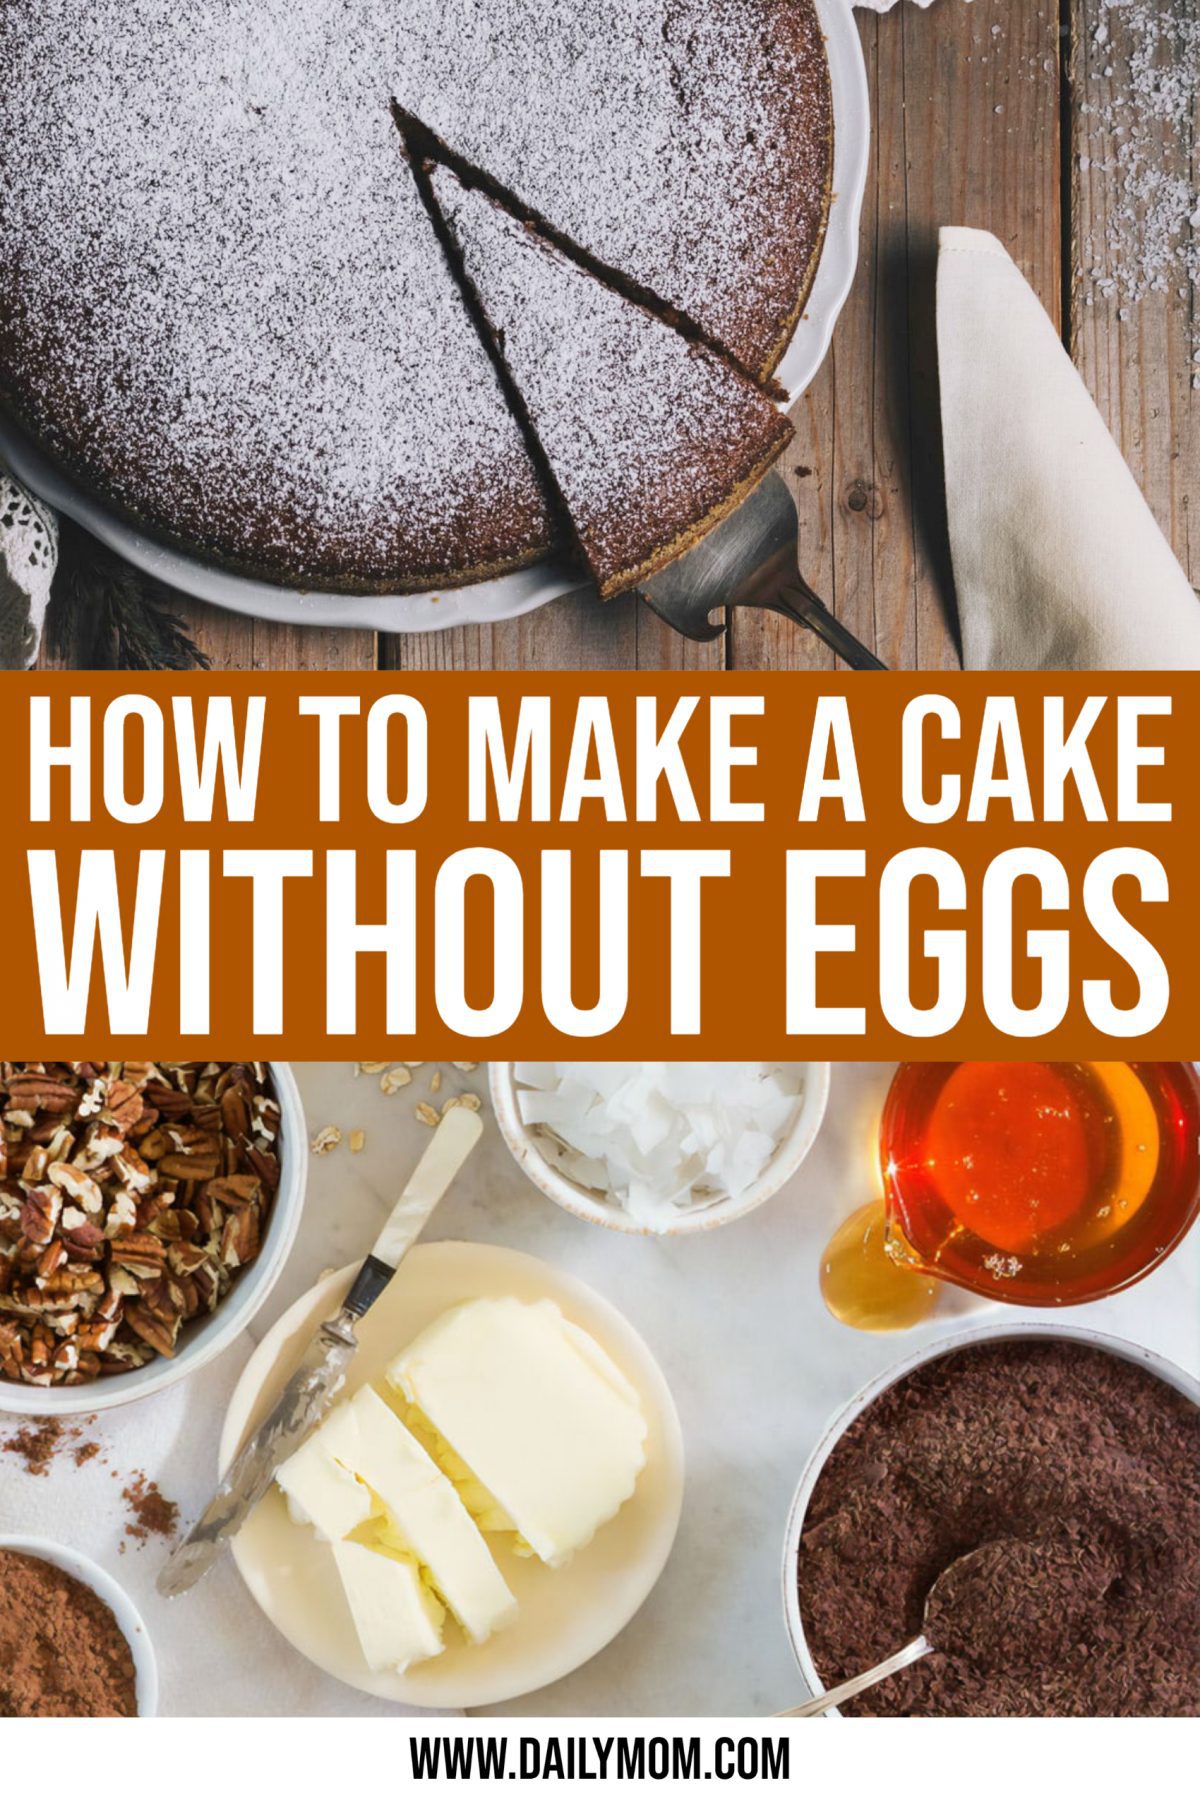 How To Make A Cake Without Eggs (And 5 Delicious Eggless Recipes)